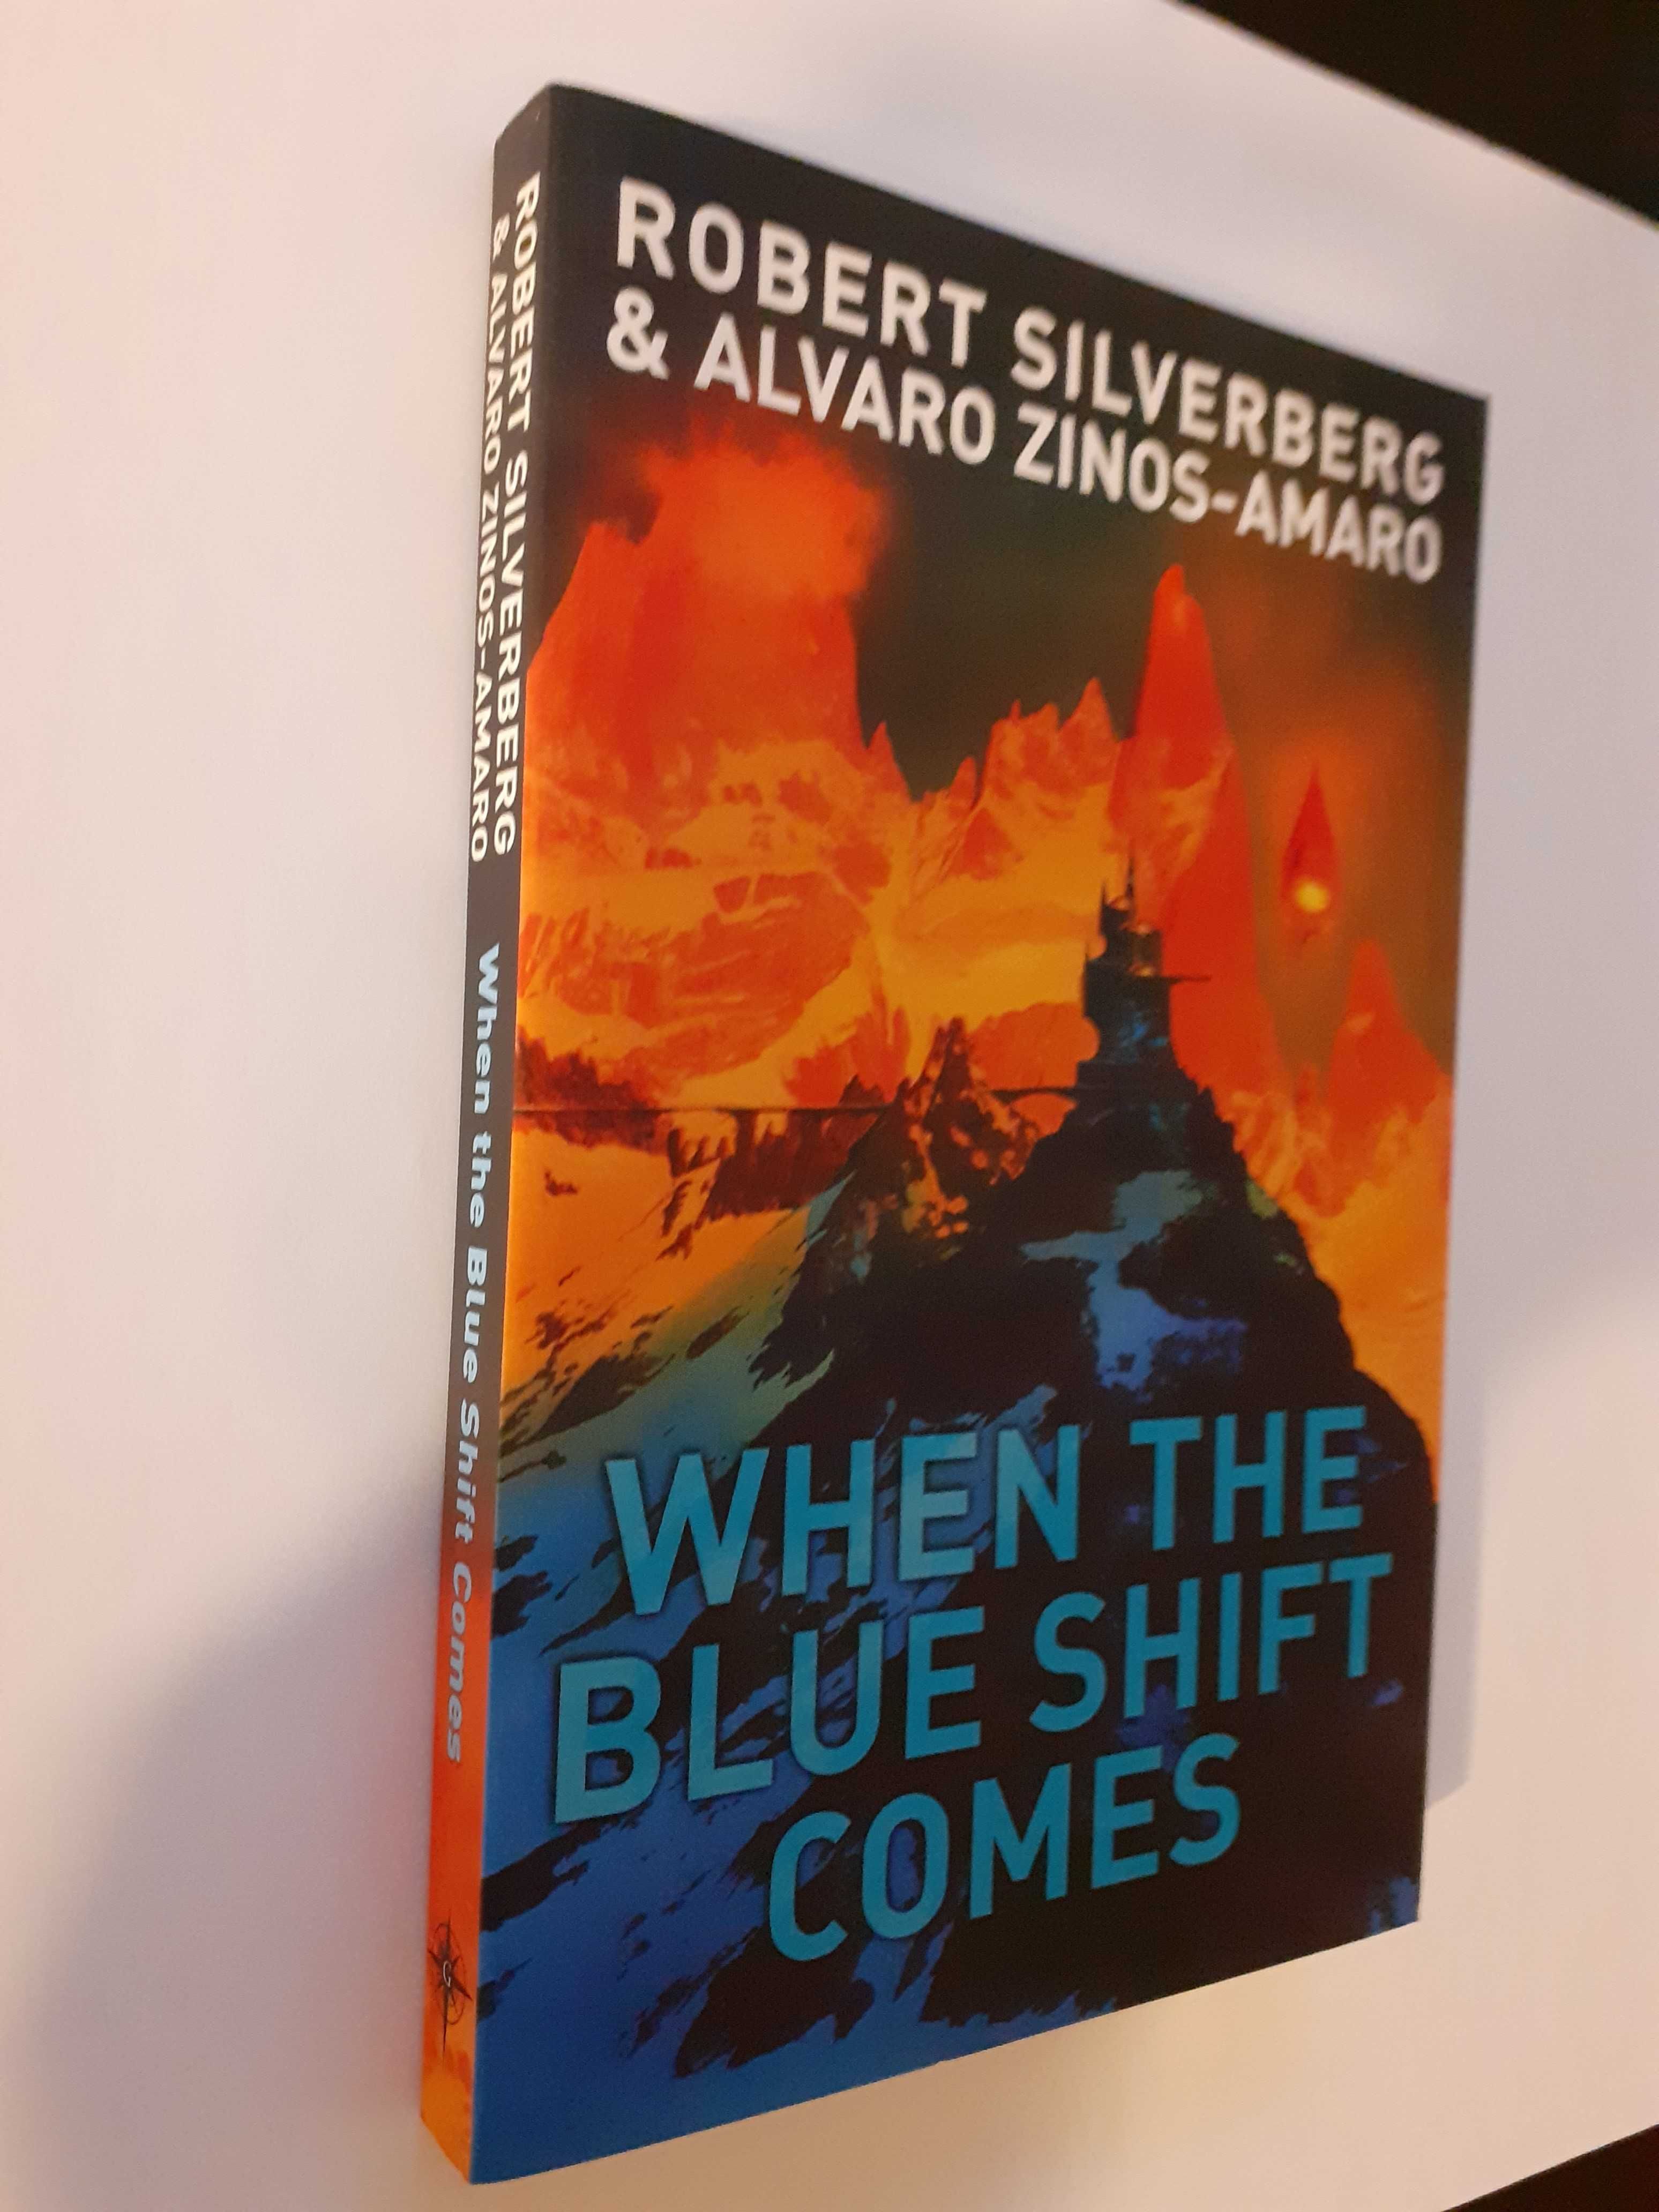 Robert Silverberg, When the blue shift comes (science fiction)